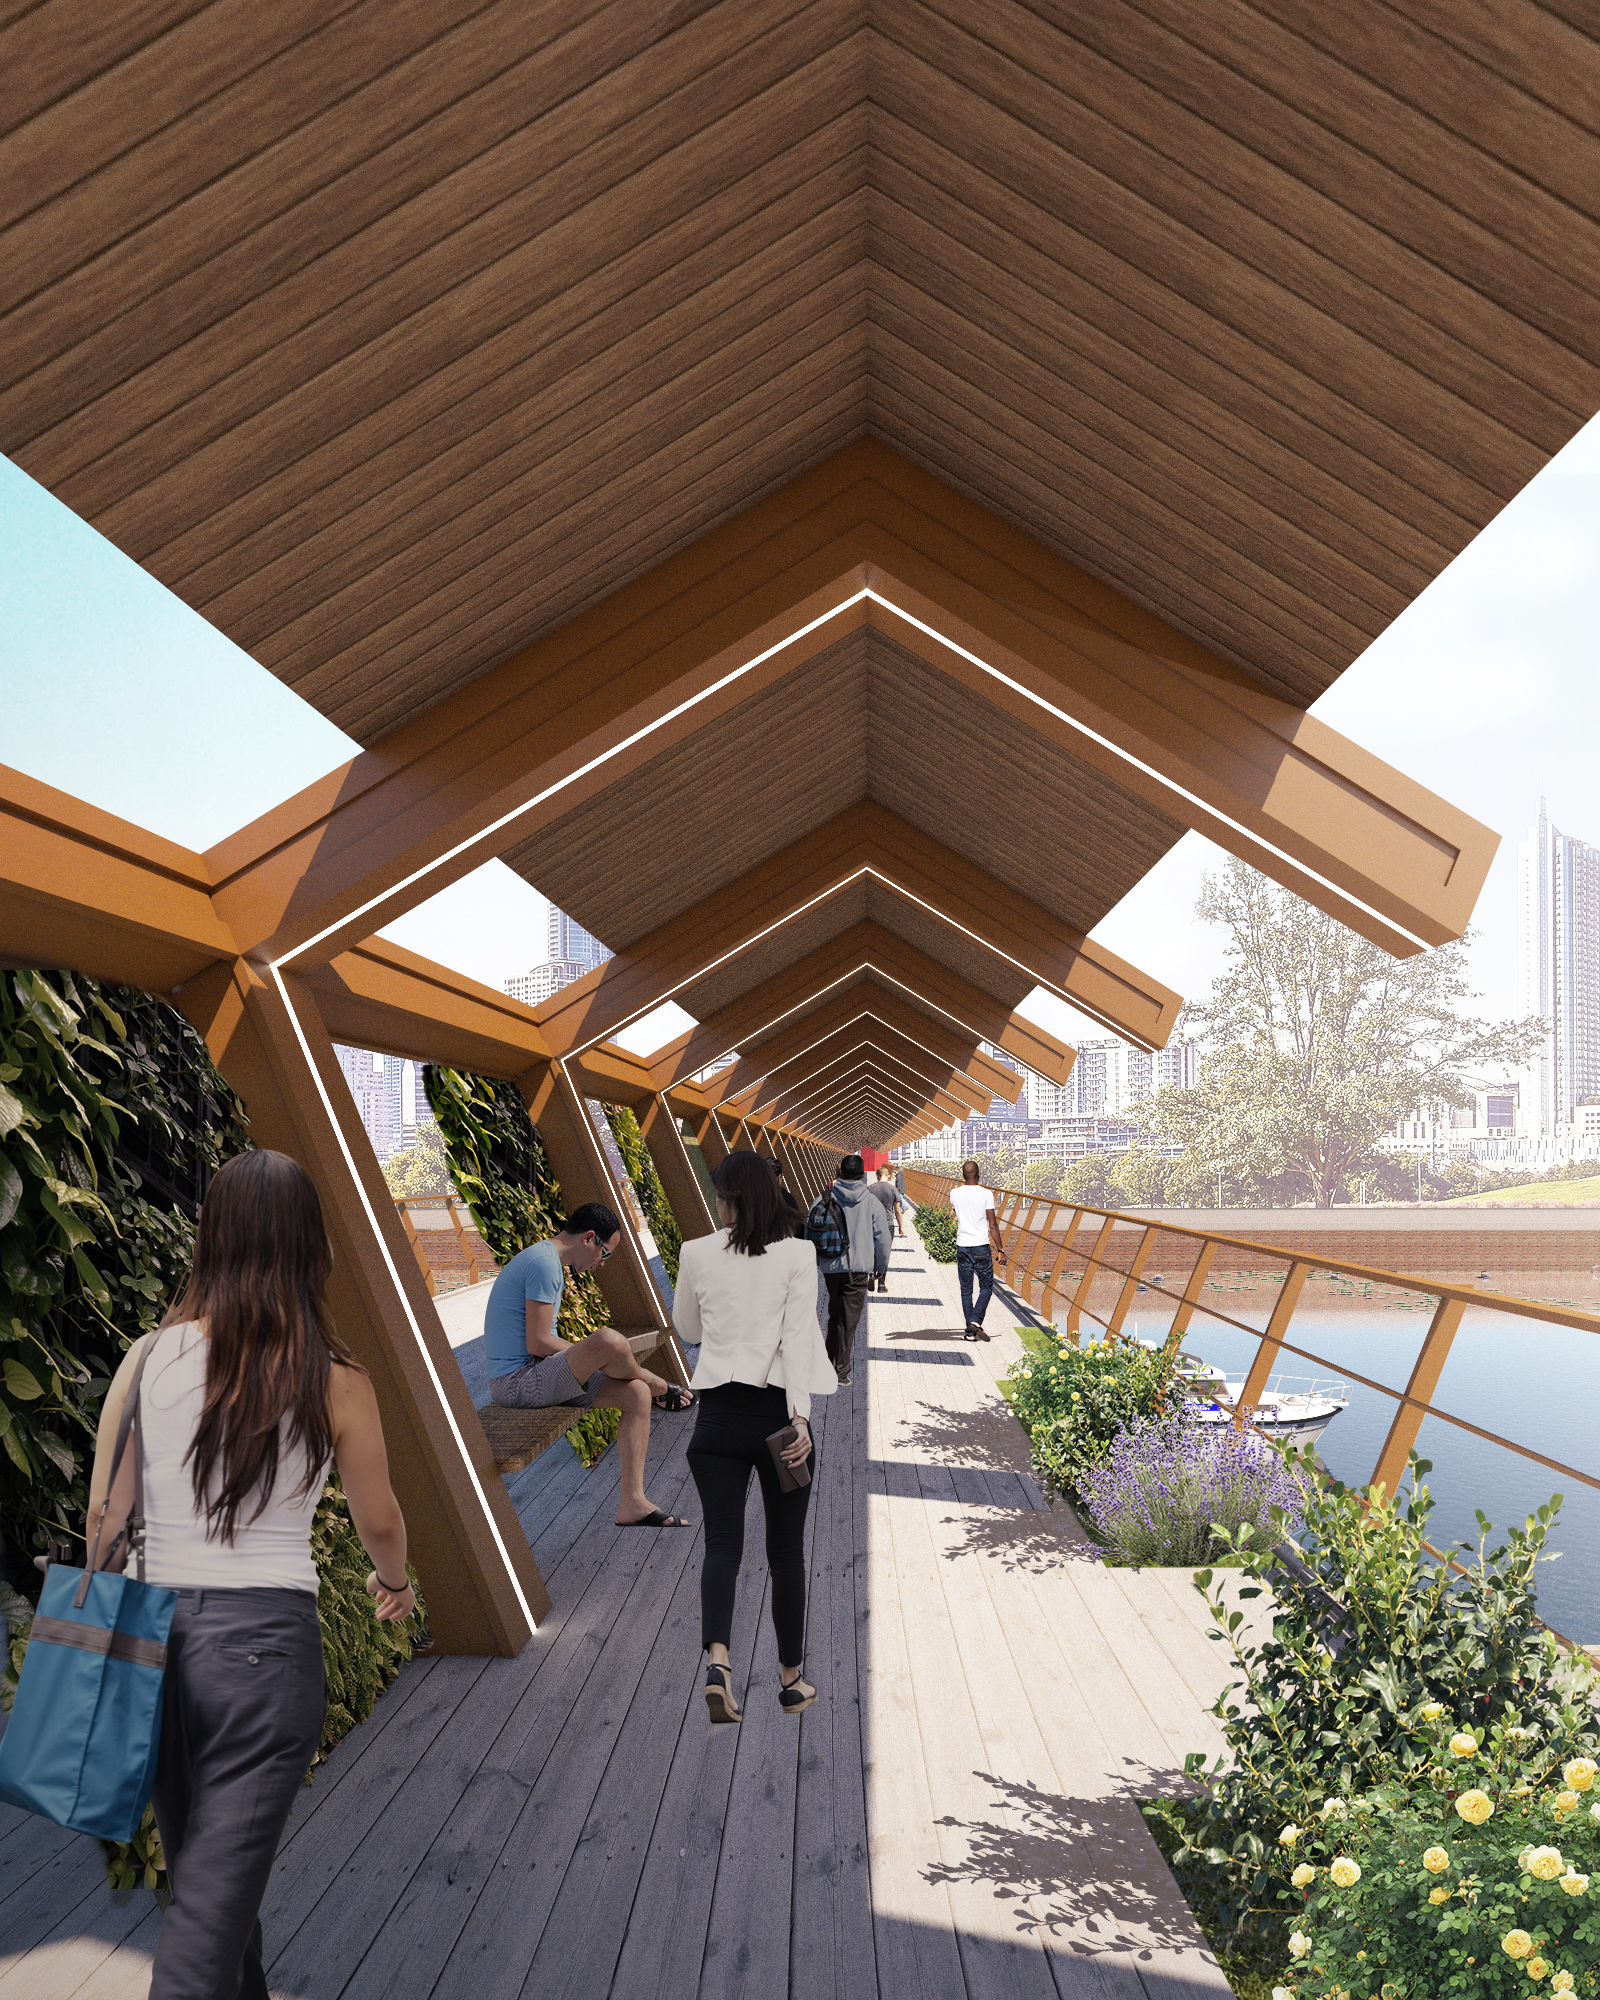 The Riverlane bridge's interior features a the use of recycled materials like wood plastic composite (WPC) panel boards along with green walls and planters.